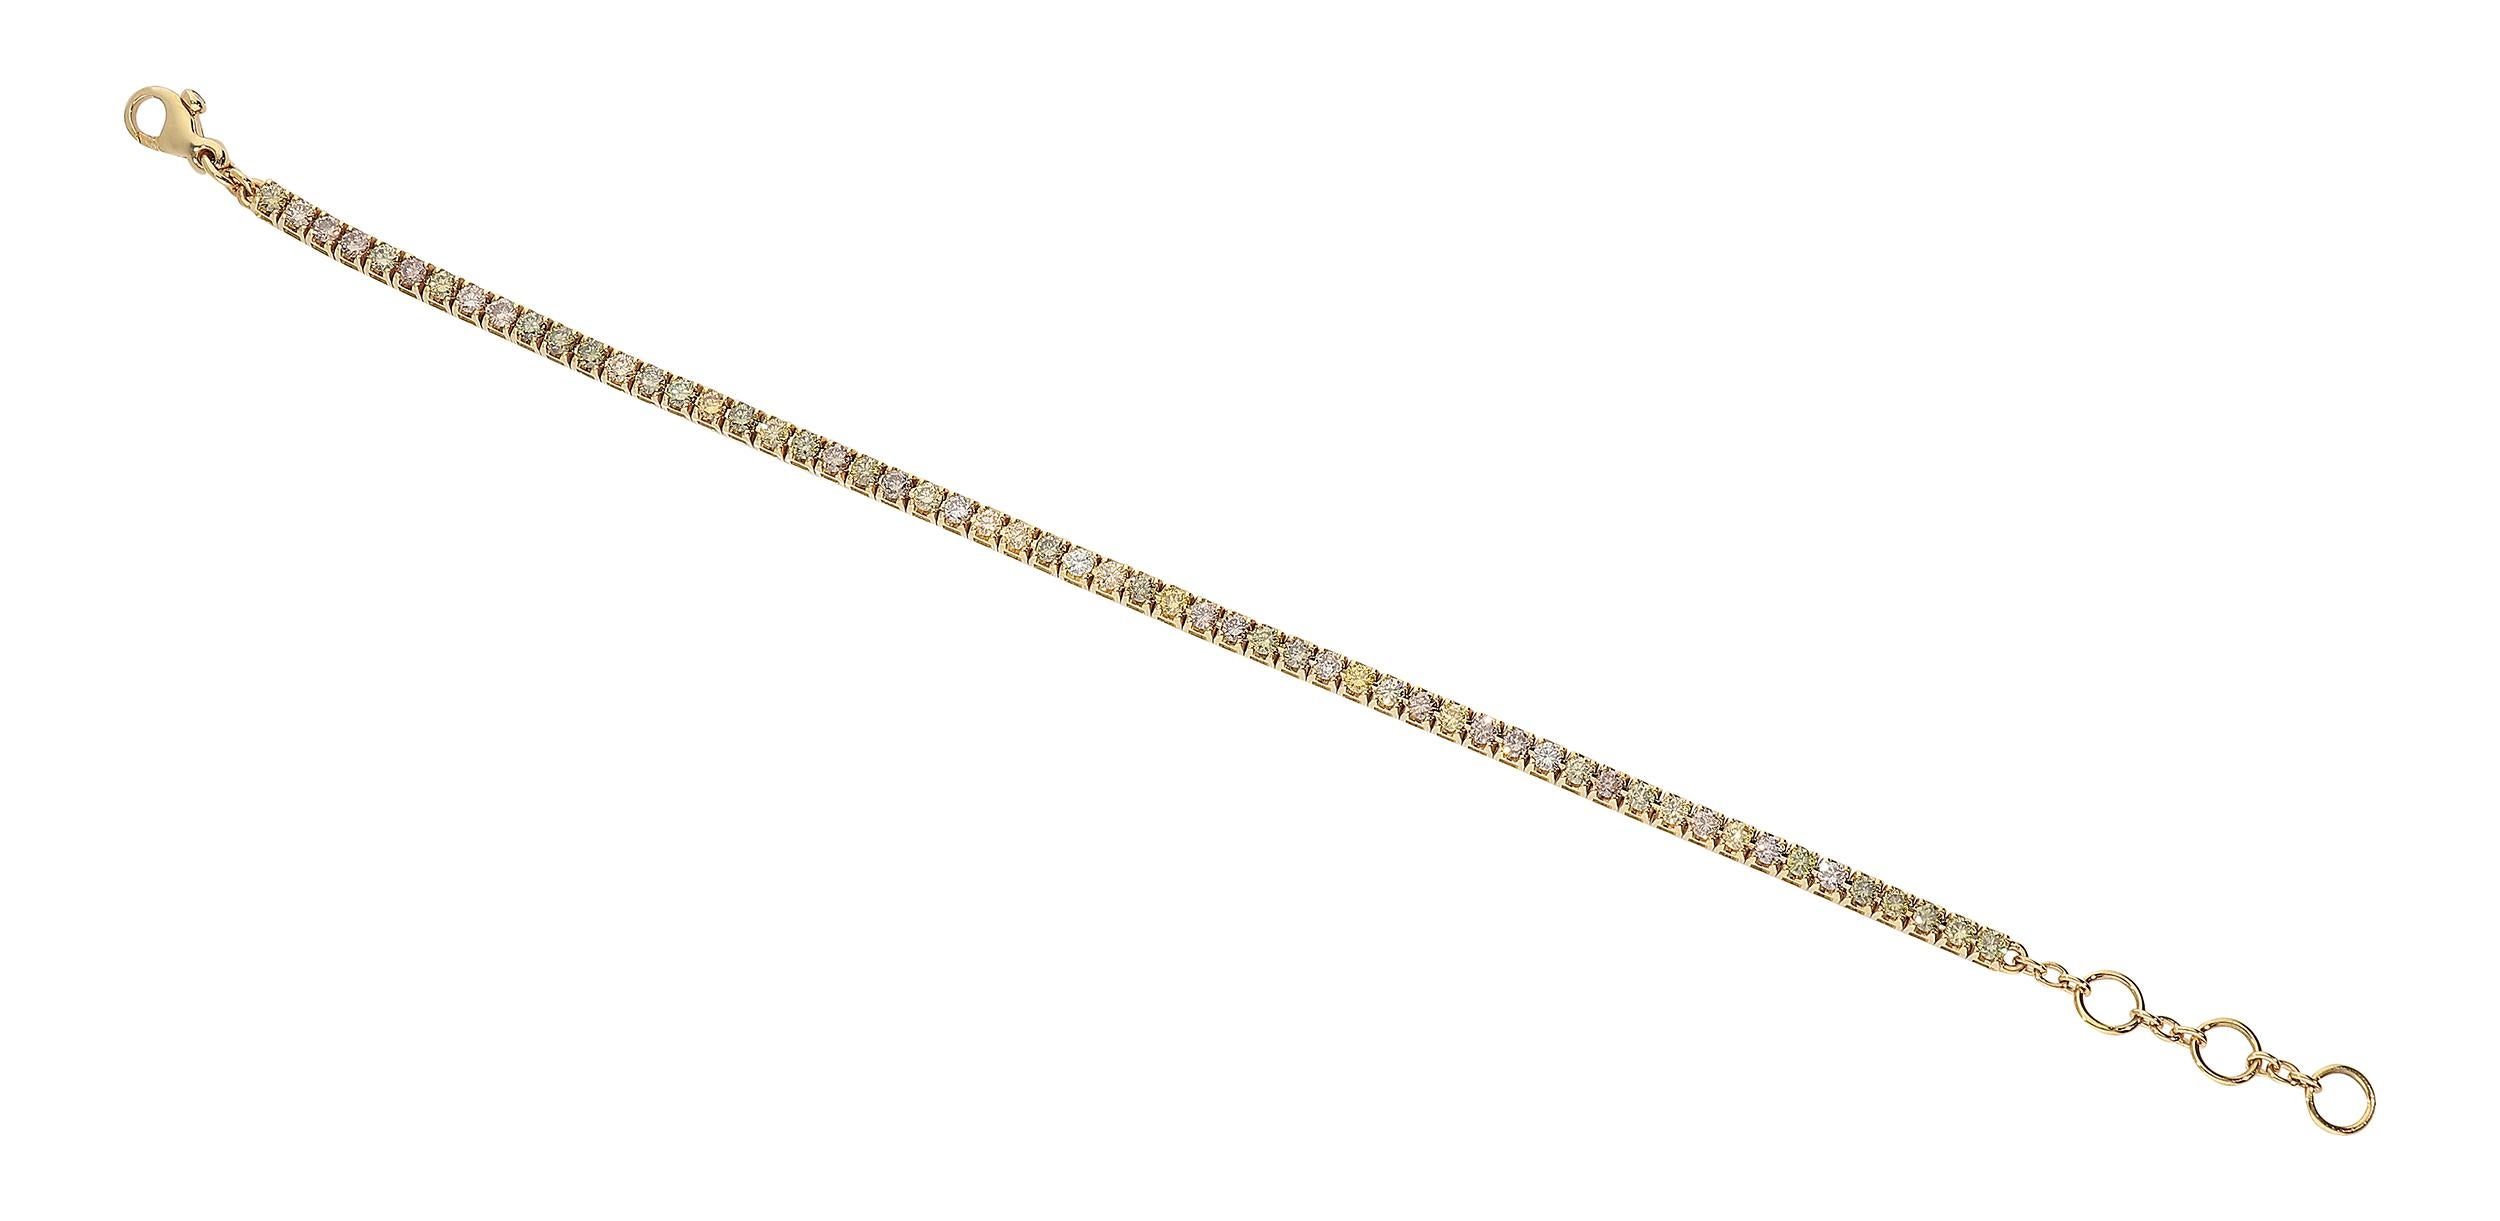 Trendy tennis bracelet in 18kt yellow gold for a weight of 11,50 grams and multi colored round brilliant diamonds nuanced camouflage for 2,83 carats. The length is 17 centimeters plus 3 centimeters of little rings to be resized, the width is 2.90